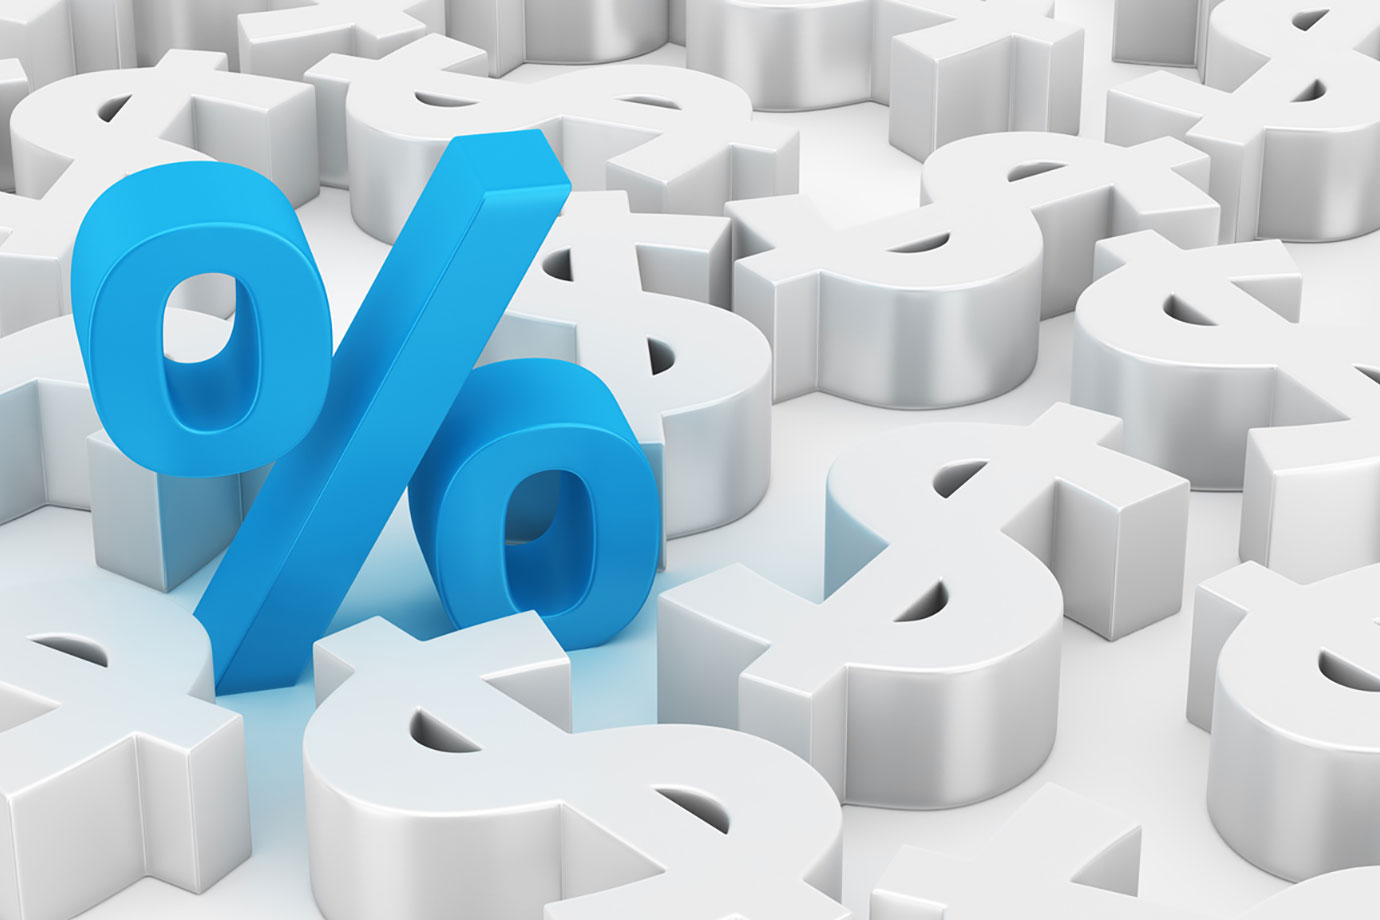 Understanding Interest Rates: Key Concepts Every Consumer Should Know